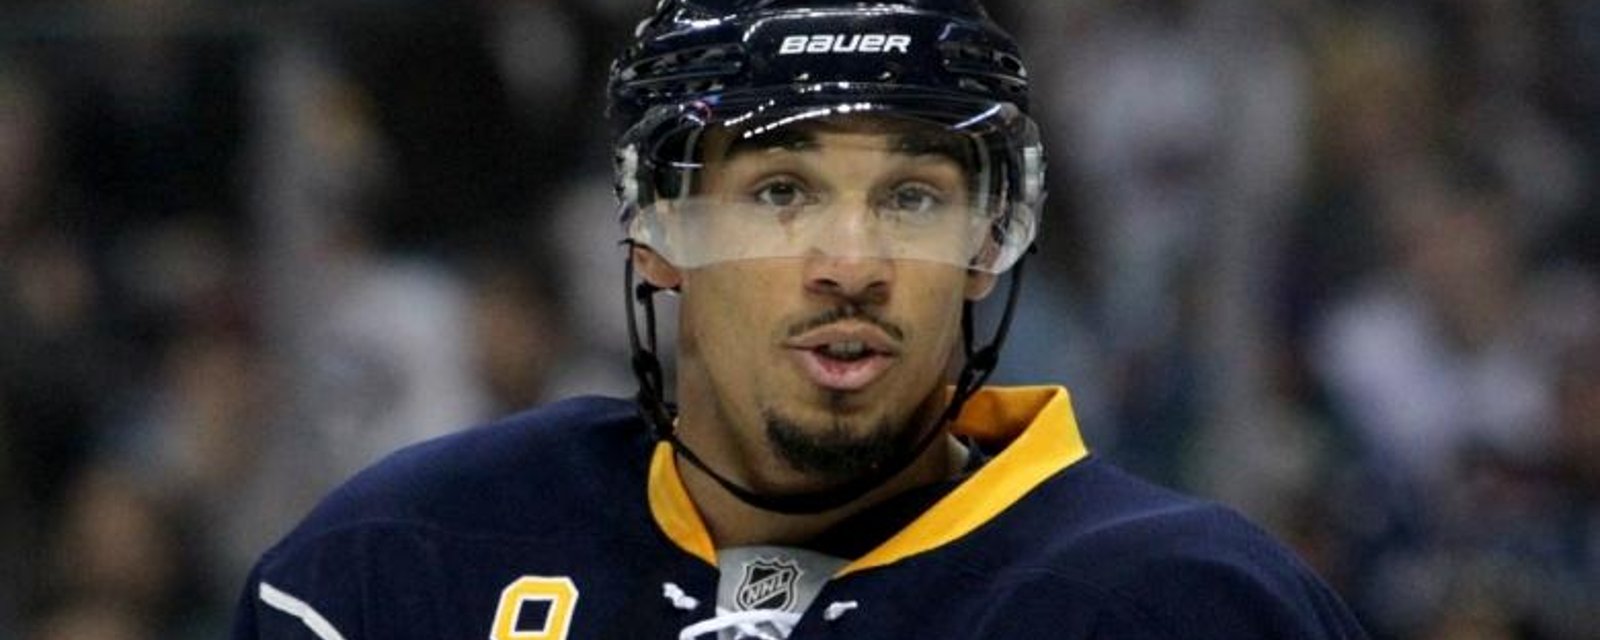 Evander Kane responds for the first time since being suspended.